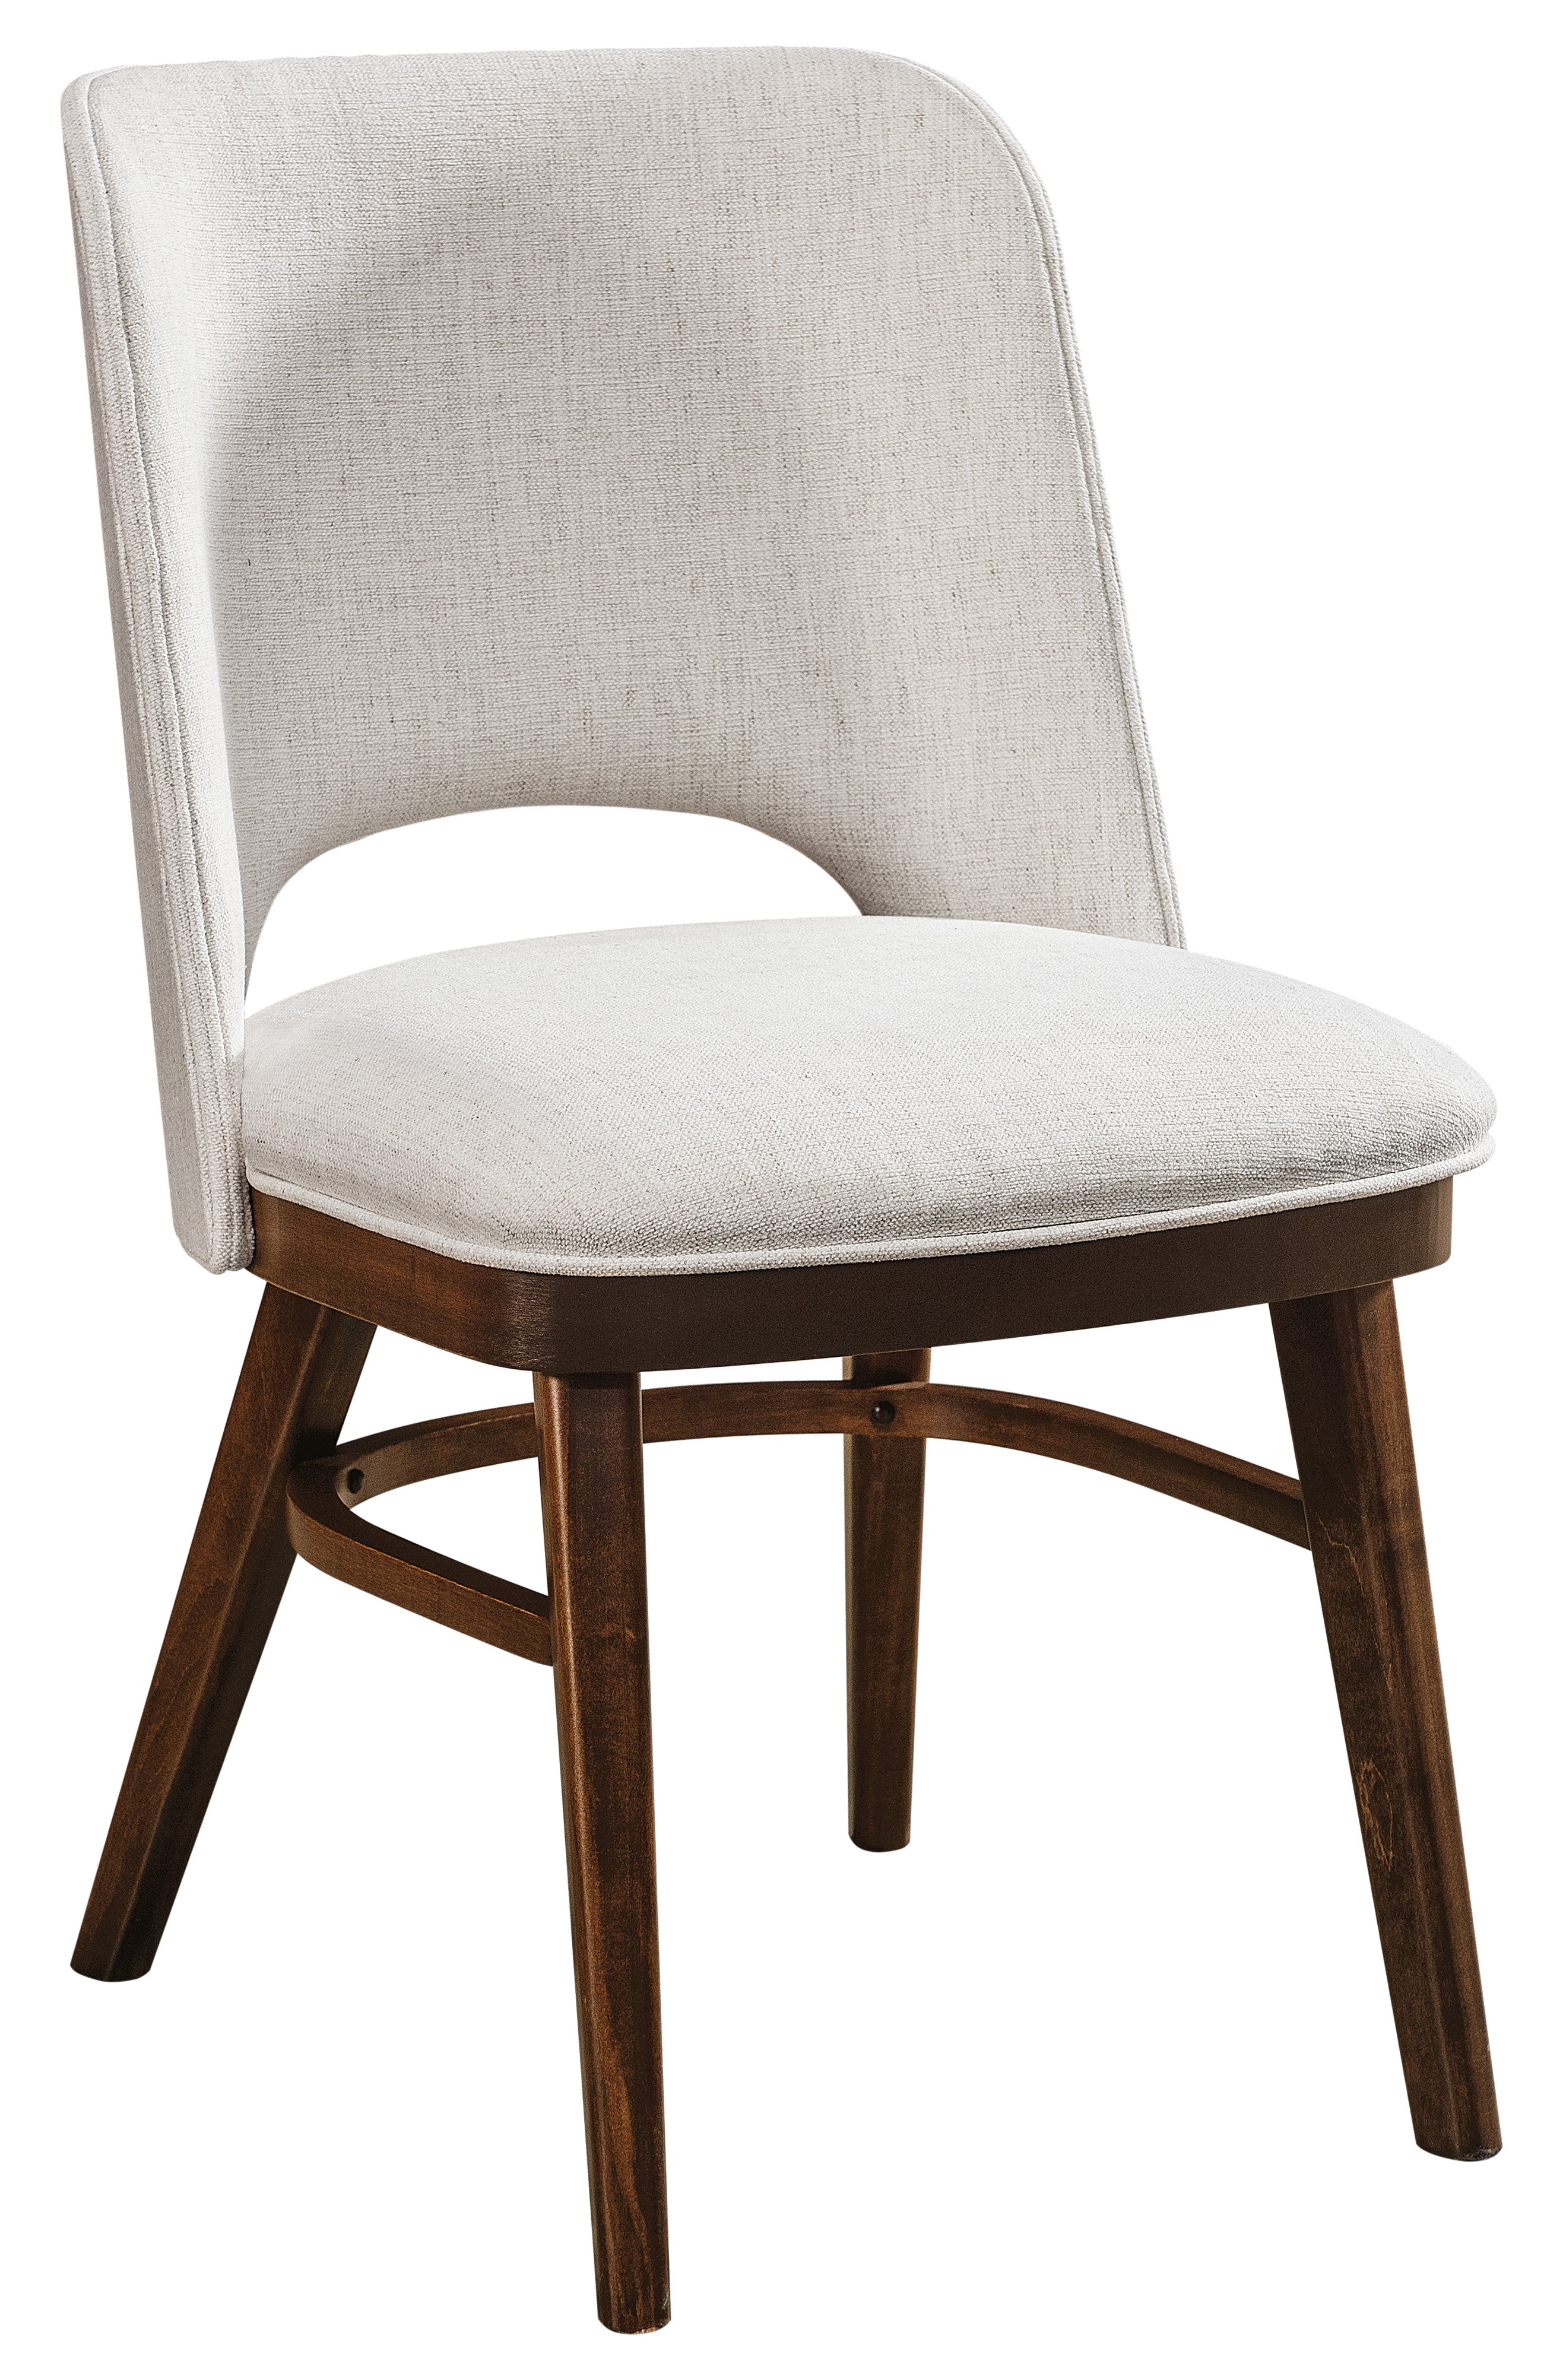 vinson chair shown in brown maple with asubry stain and nomad snow fabric